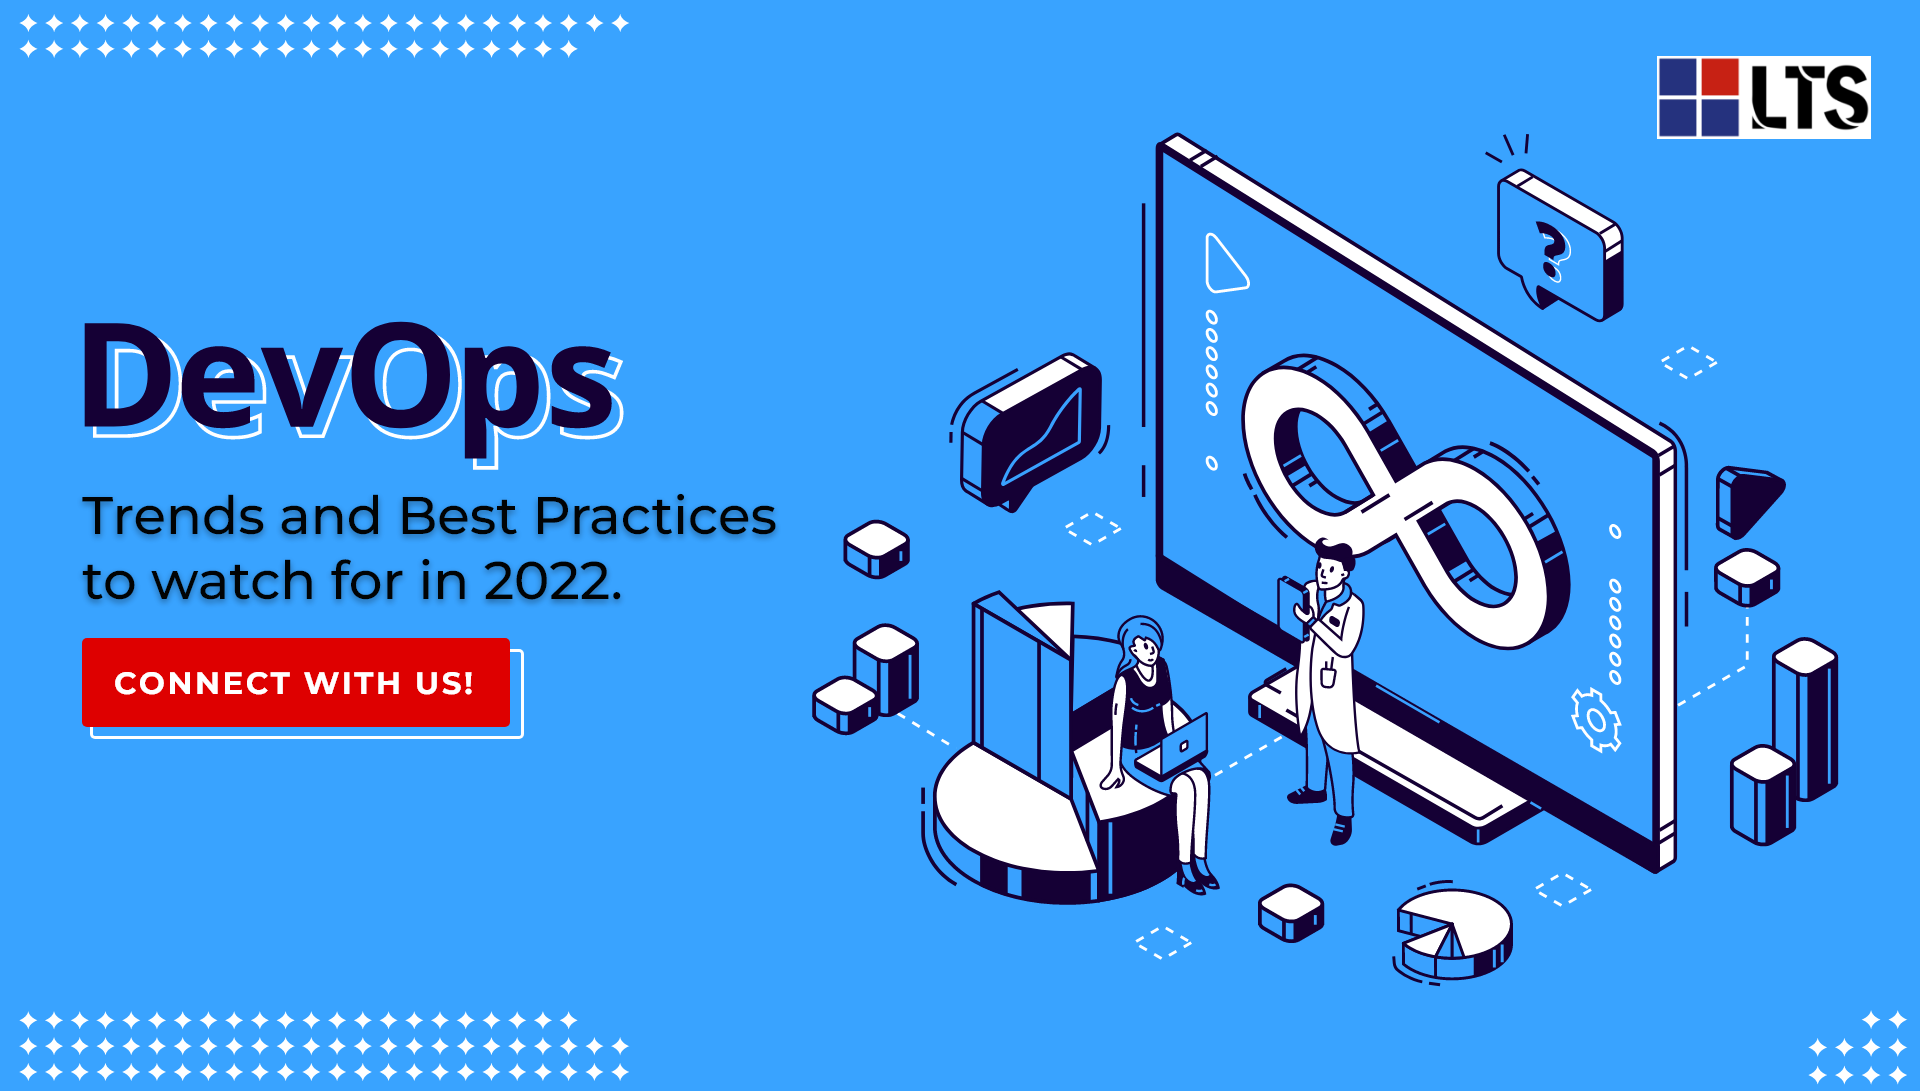 DevOps Trends and Best Practices to watch for in 2022